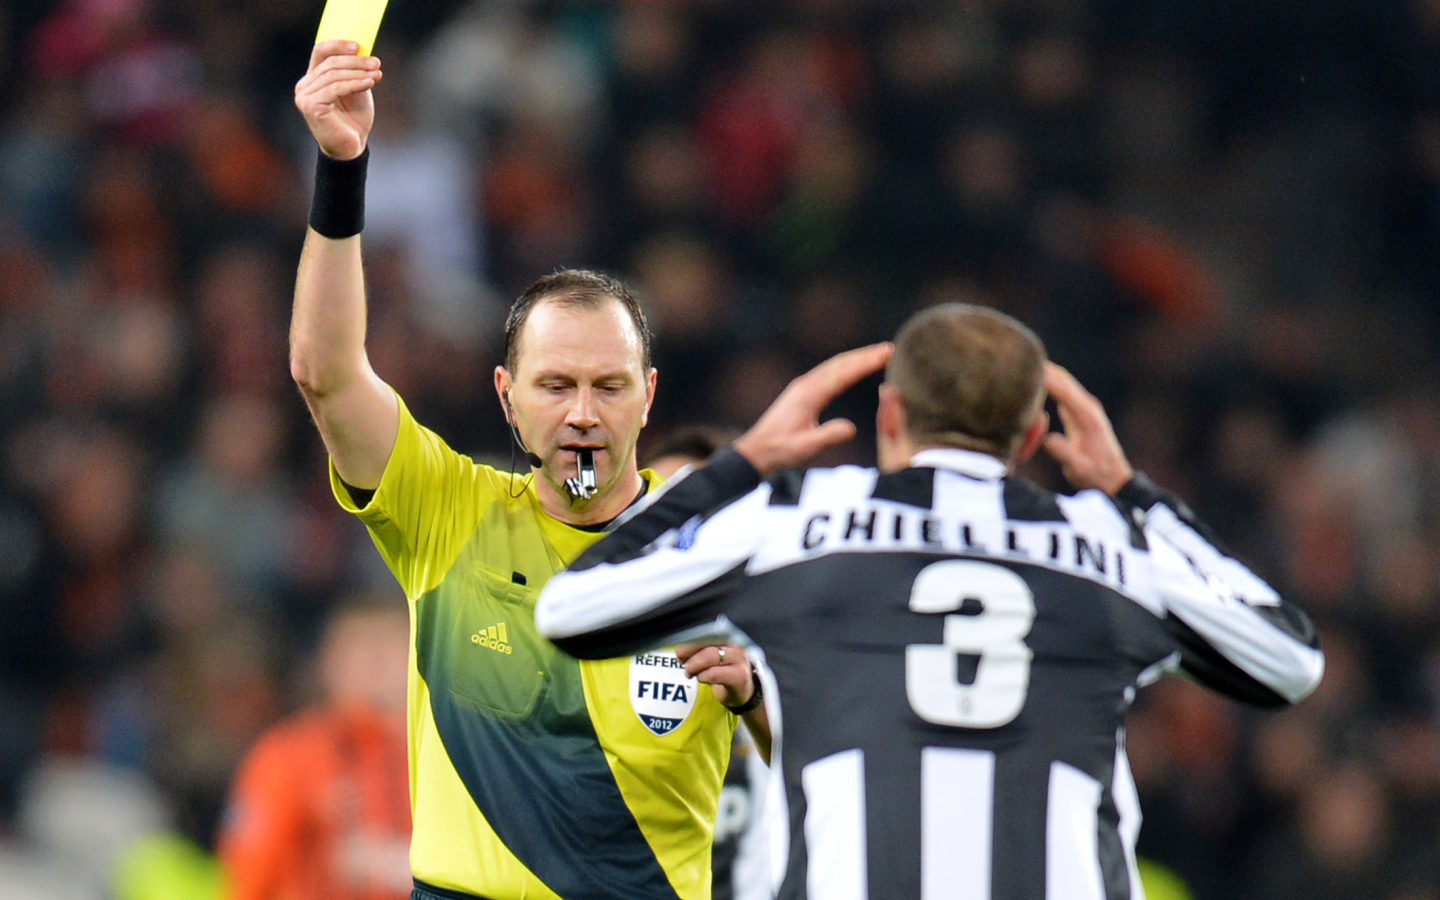 The halfback of Juventus Giorgio Chiellini gets a yellow card